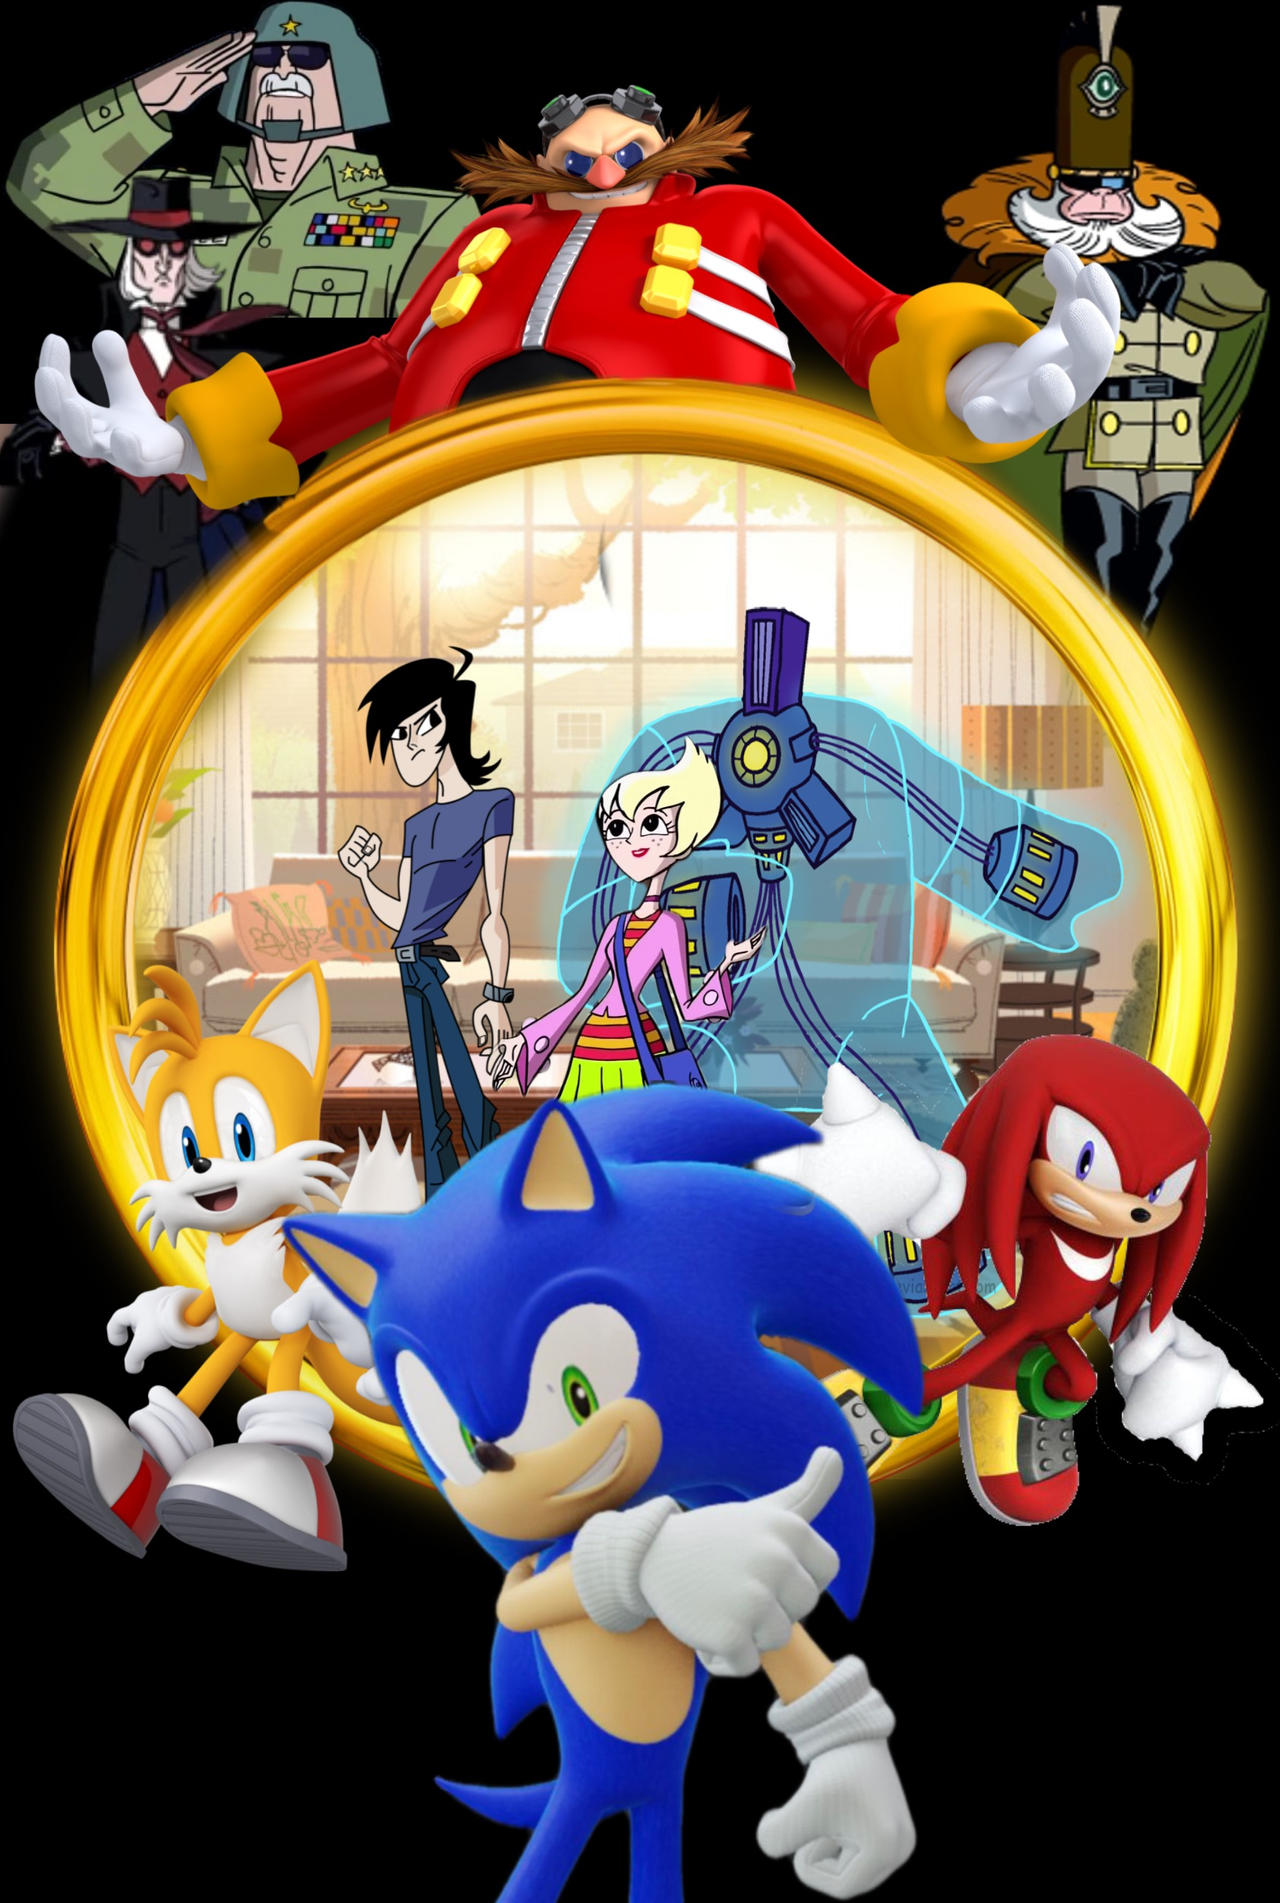 Sonic the hedgehog 3 ( fan poster) by jalonct on DeviantArt